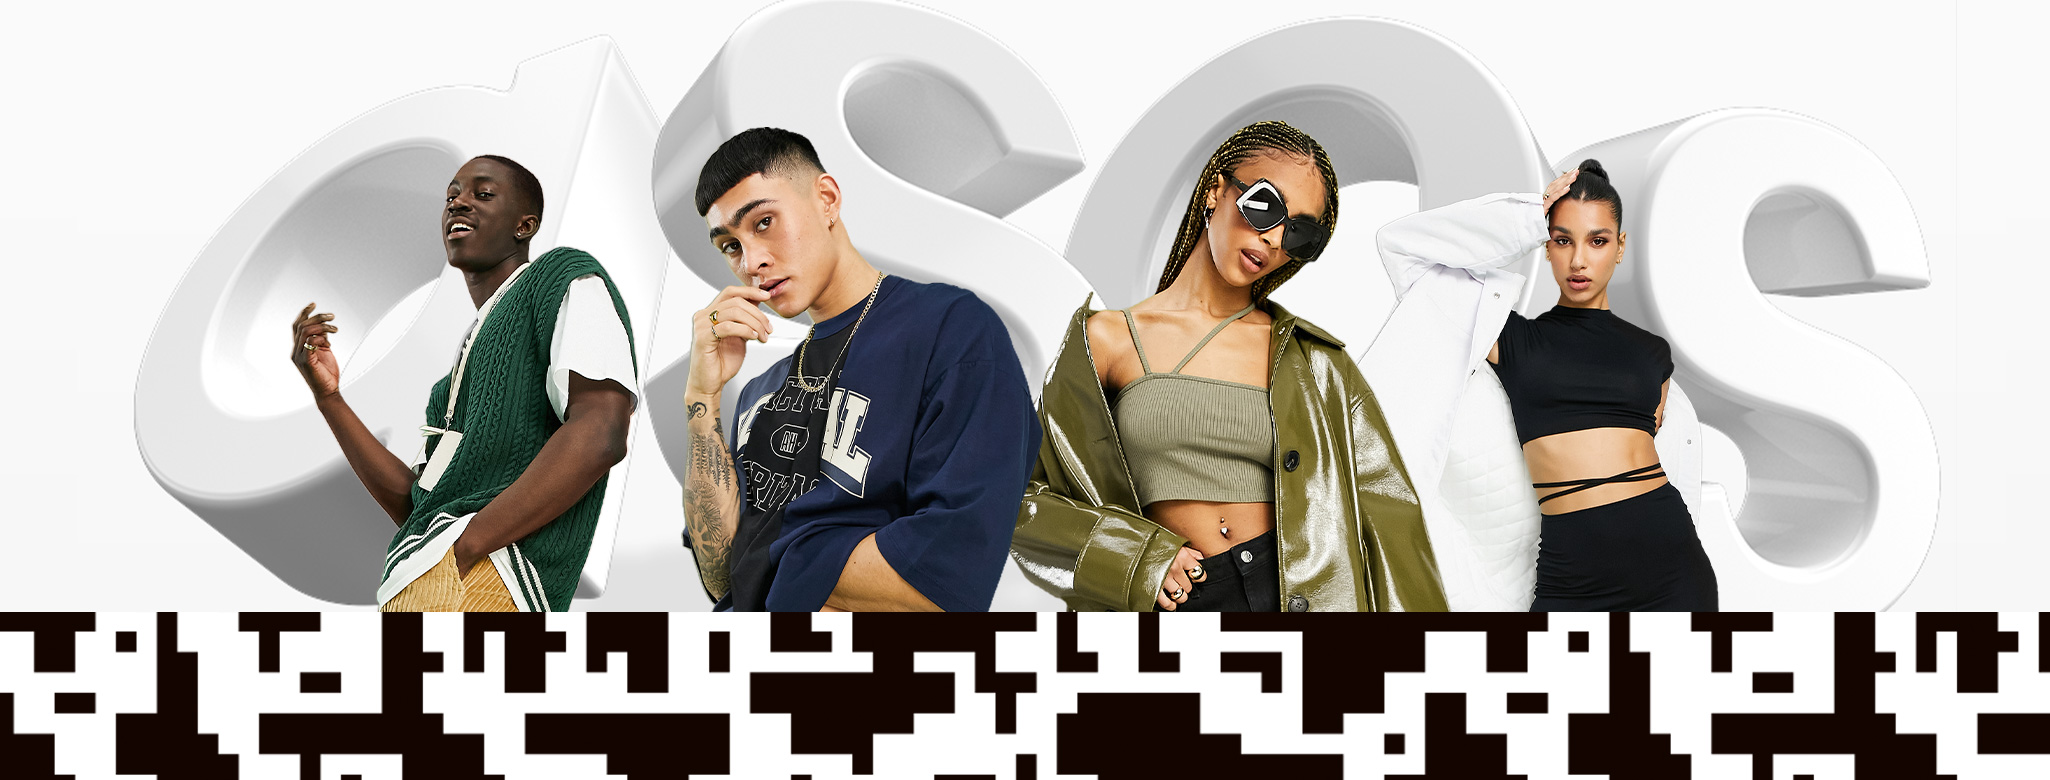 ASOS extra 25% OFF $100 with coupon including clothing & accessories